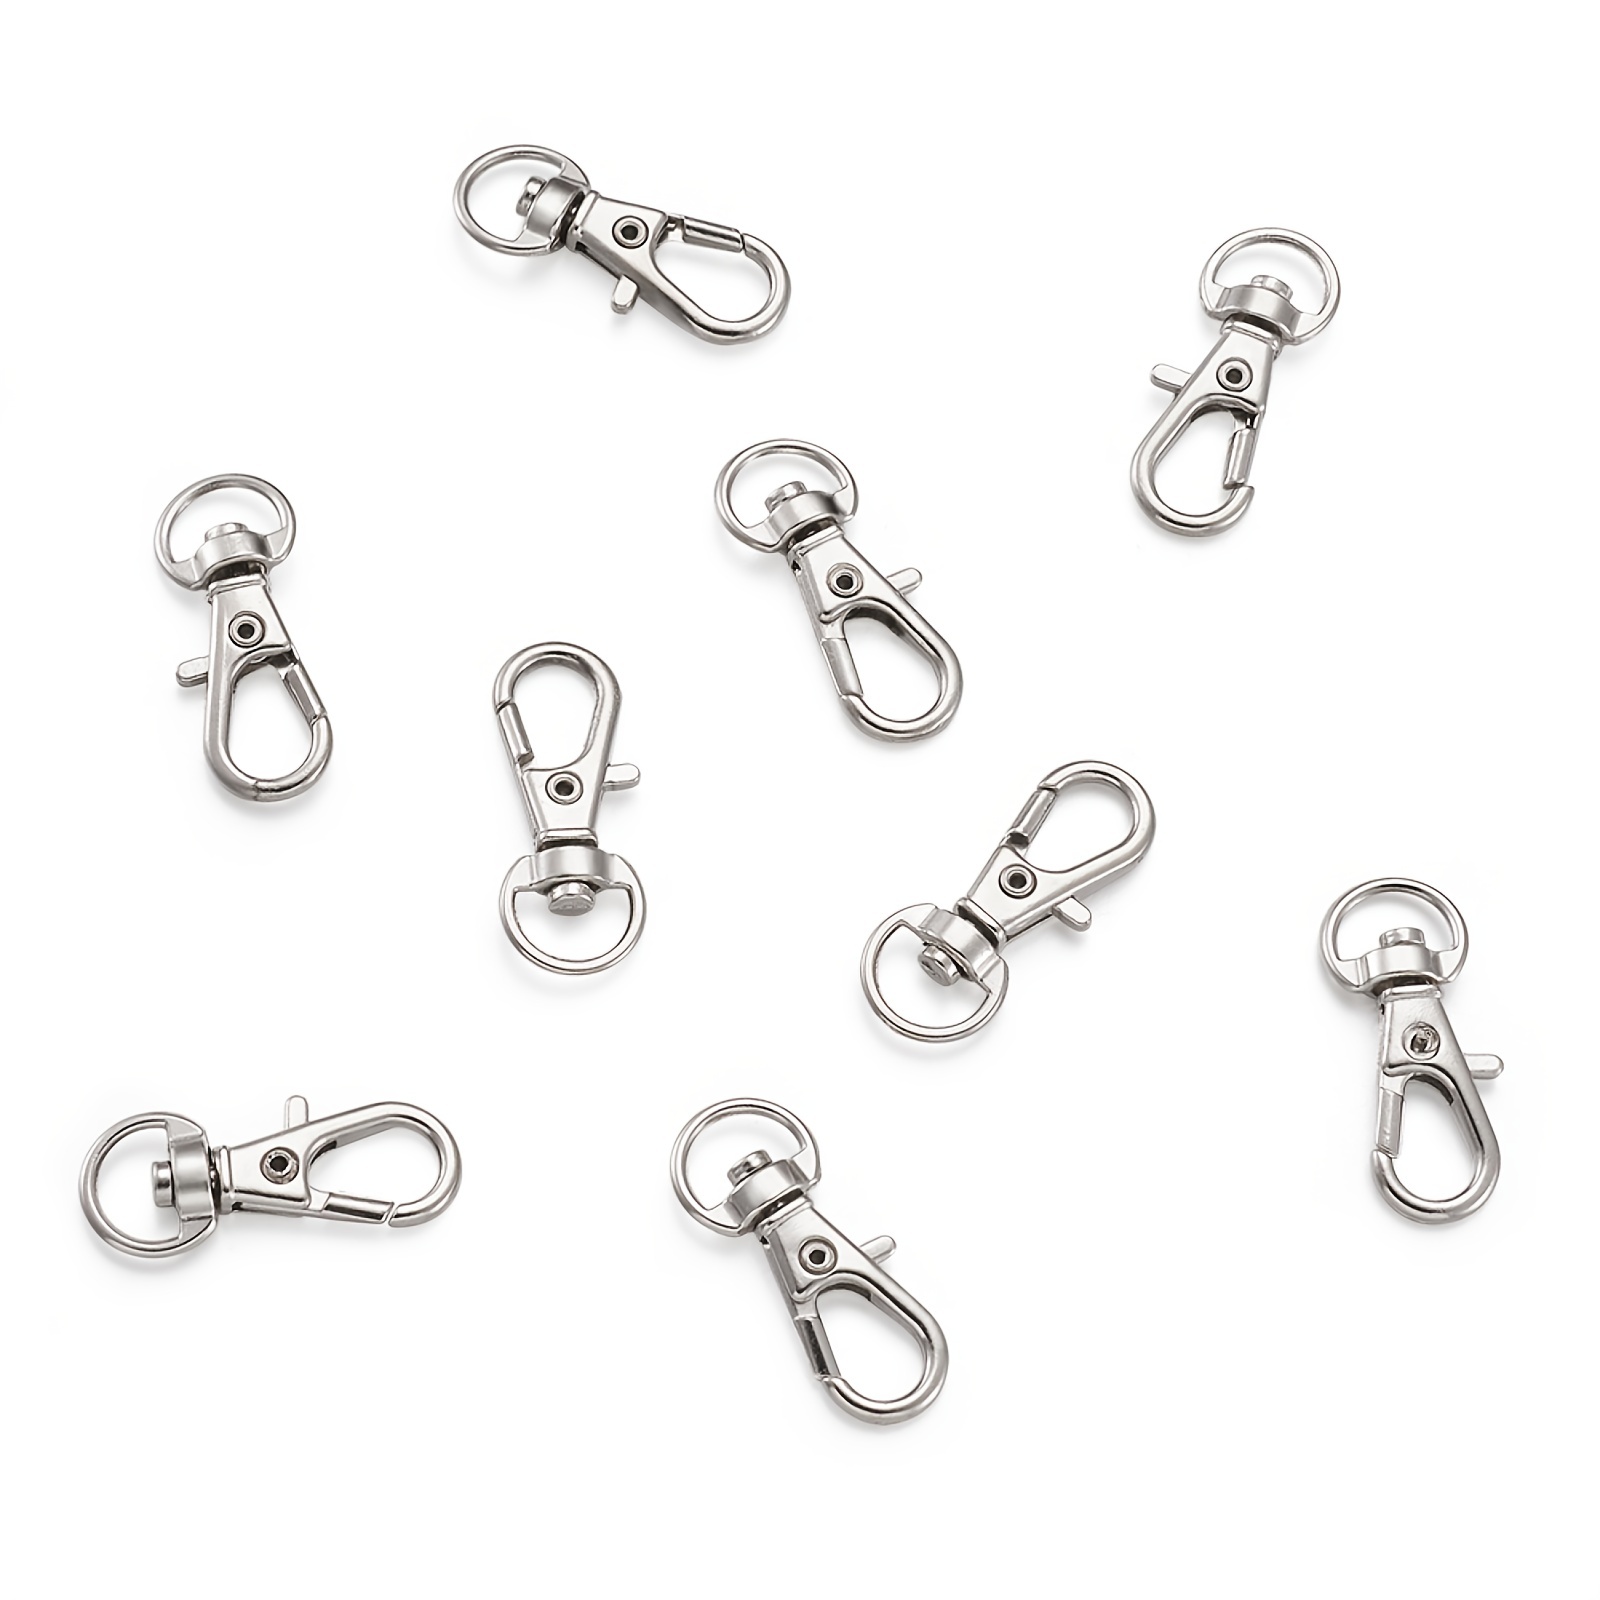 20pcs Metal Silver Keyring Lobster Claw D Ring Keychain Hooks For School  Bag